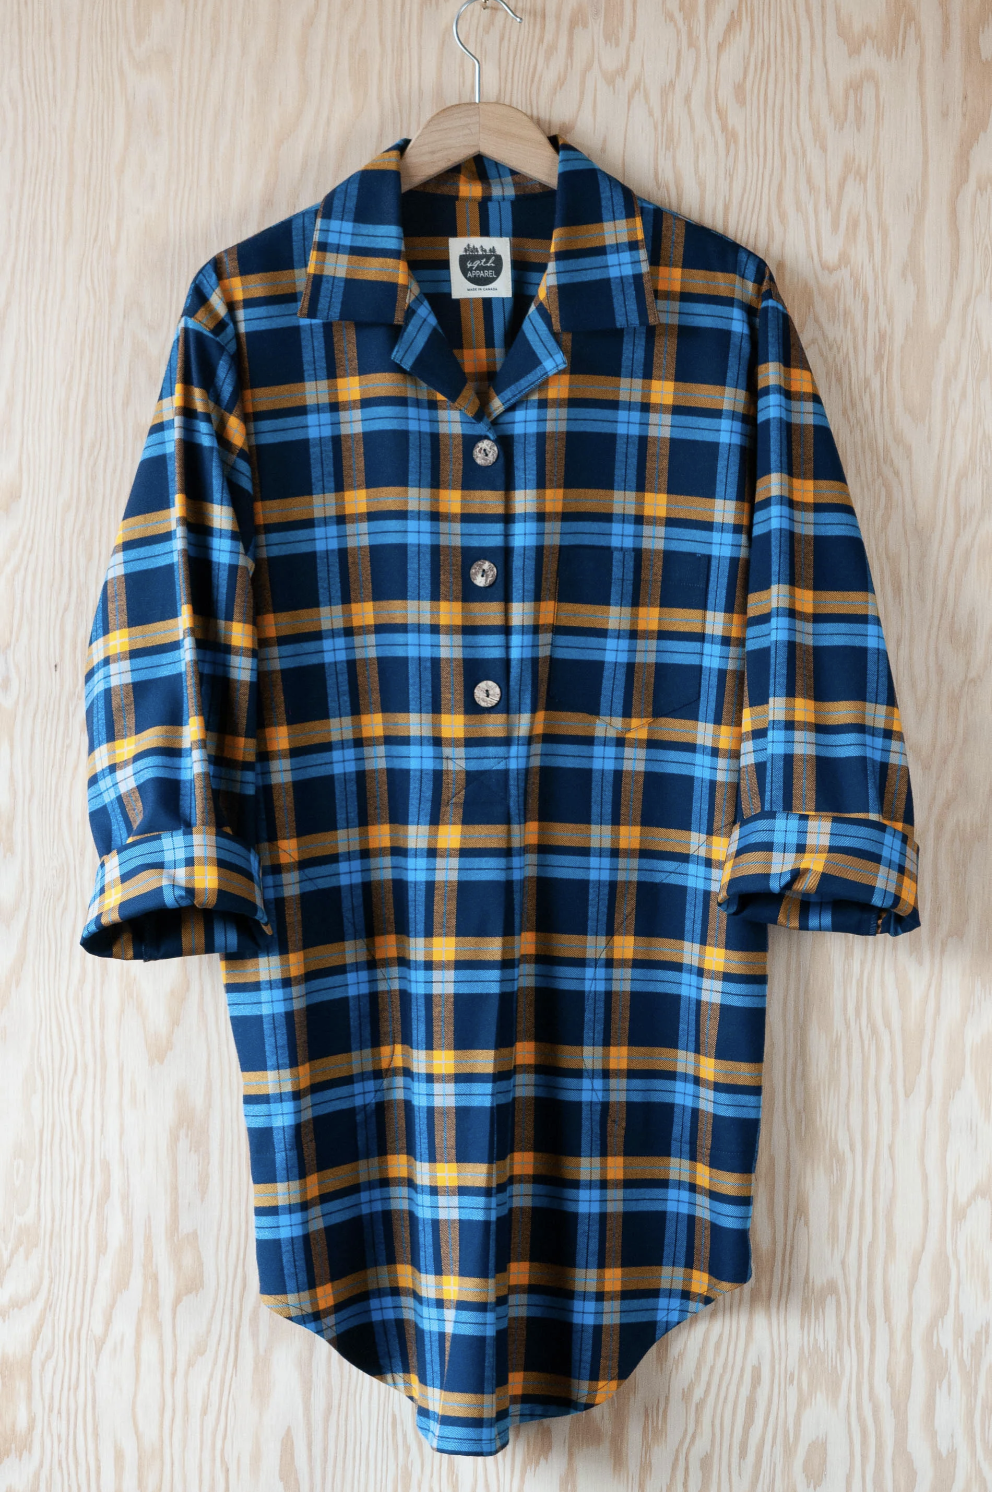 Nightshirt in blue and gold plaid